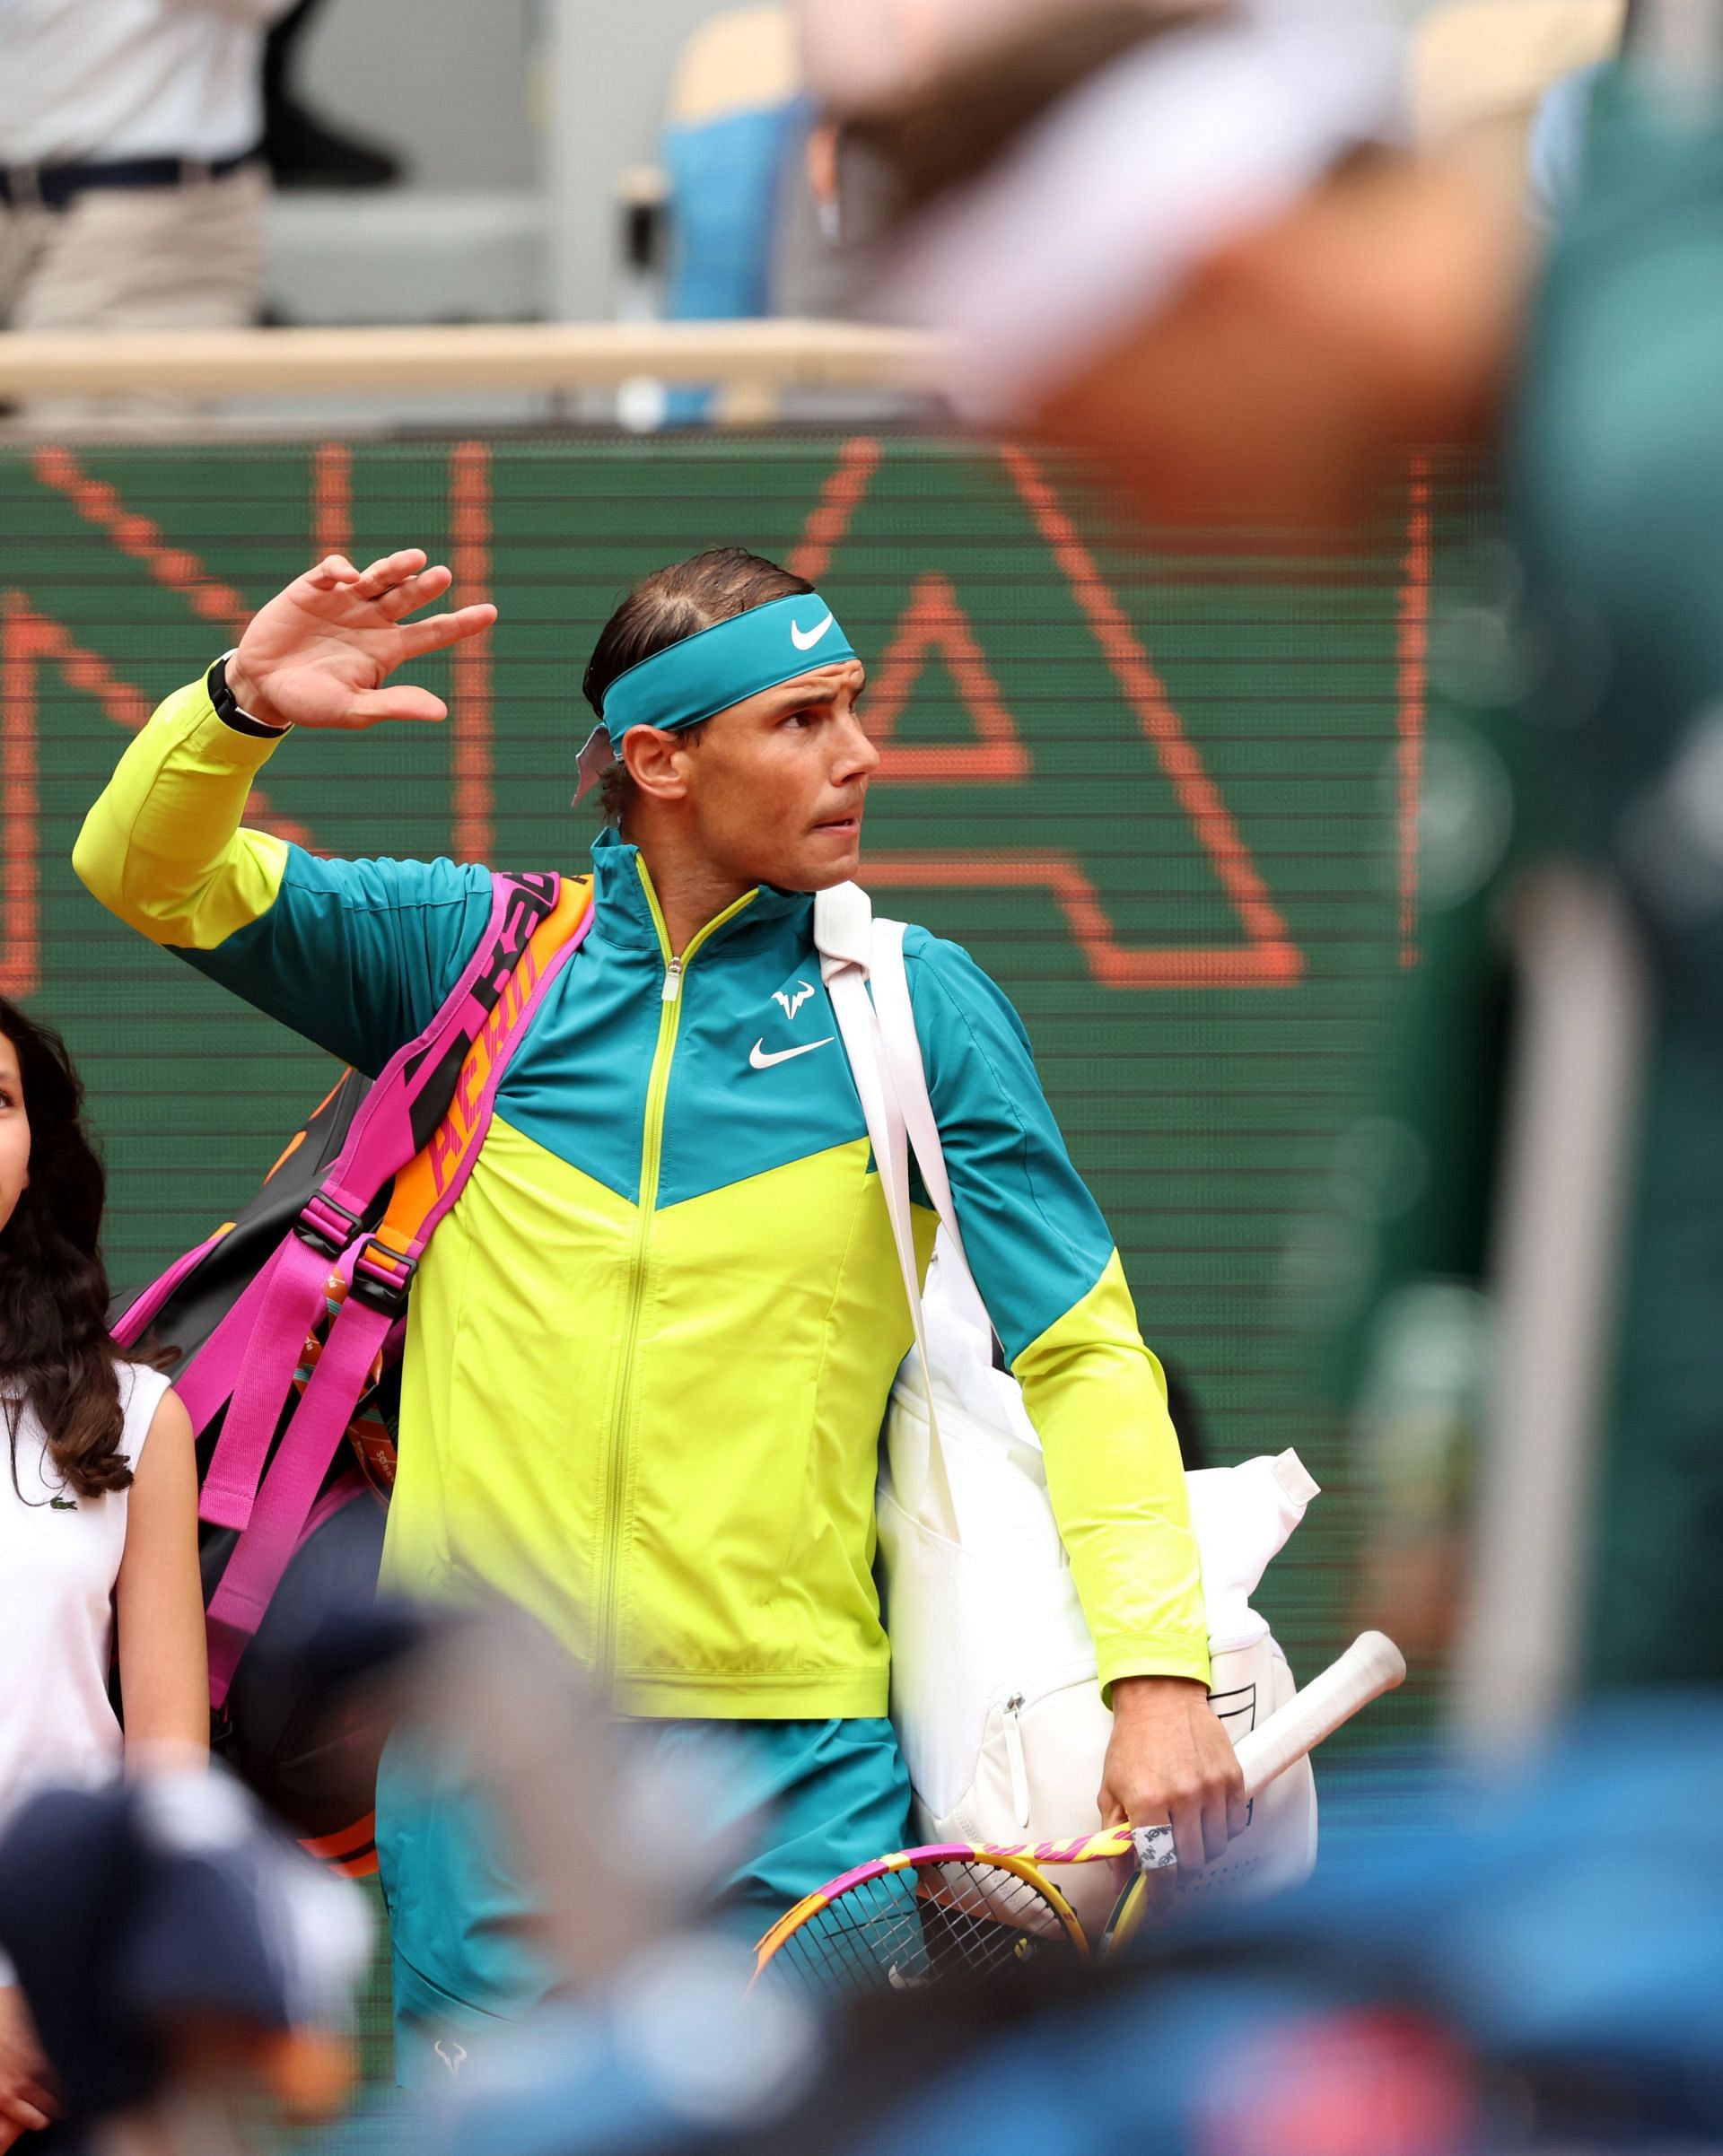 Rafael Nadal waves towards the crowd at the French Open